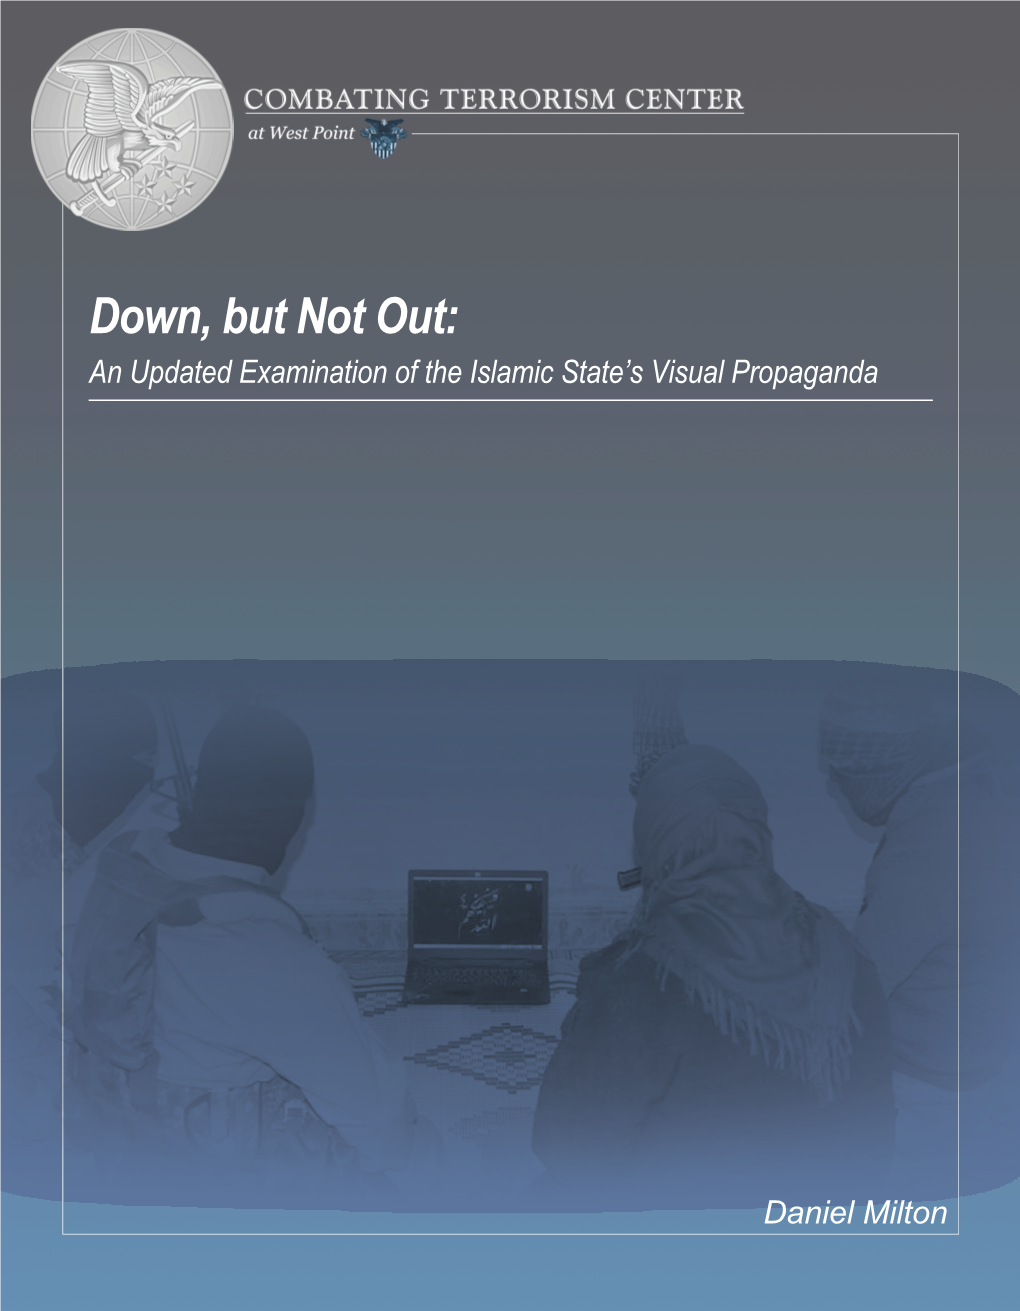 Down, but Not Out: an Updated Examination of the Islamic State's Visual Propaganda